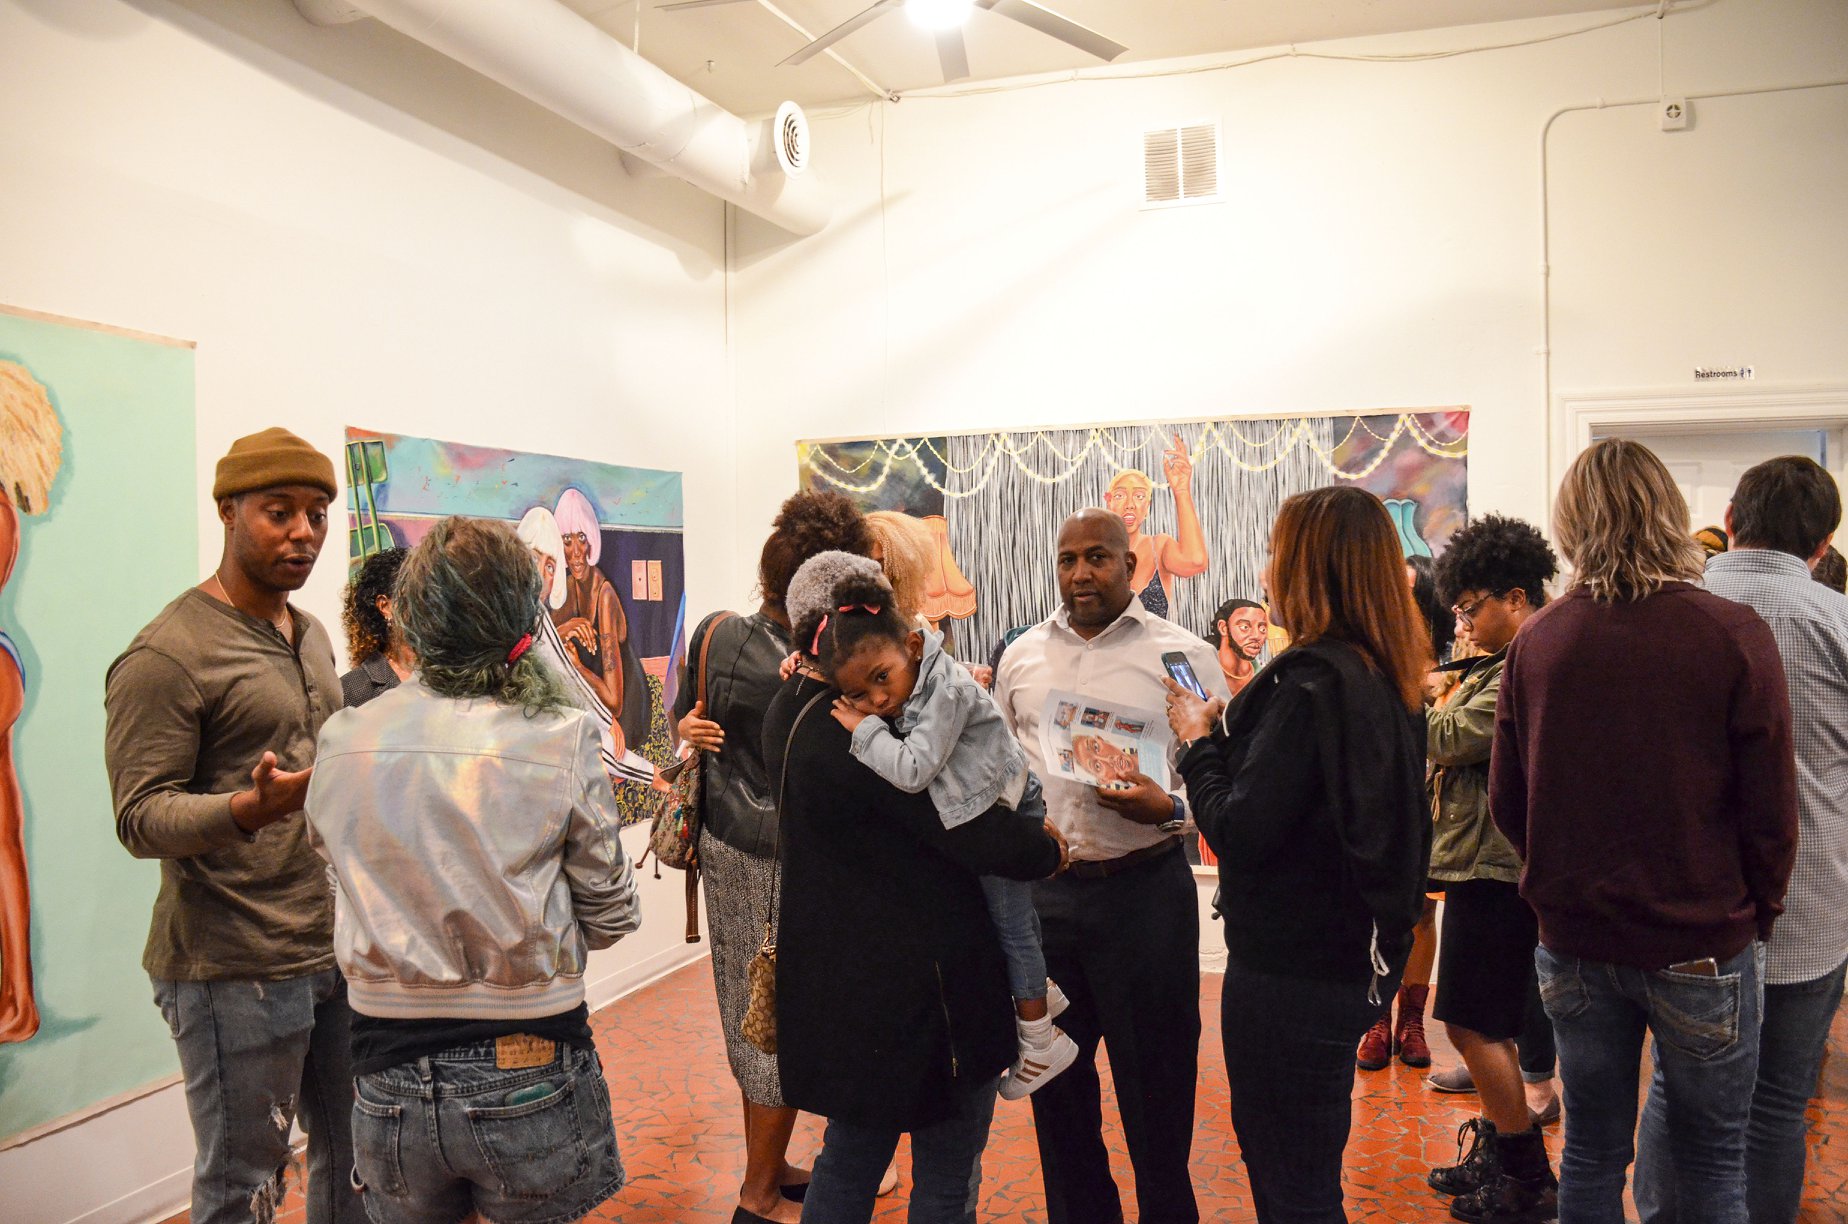 A photograph of a gallery. Around 10 people stand in the middle of the room making conversation and looking at the art on the wall.